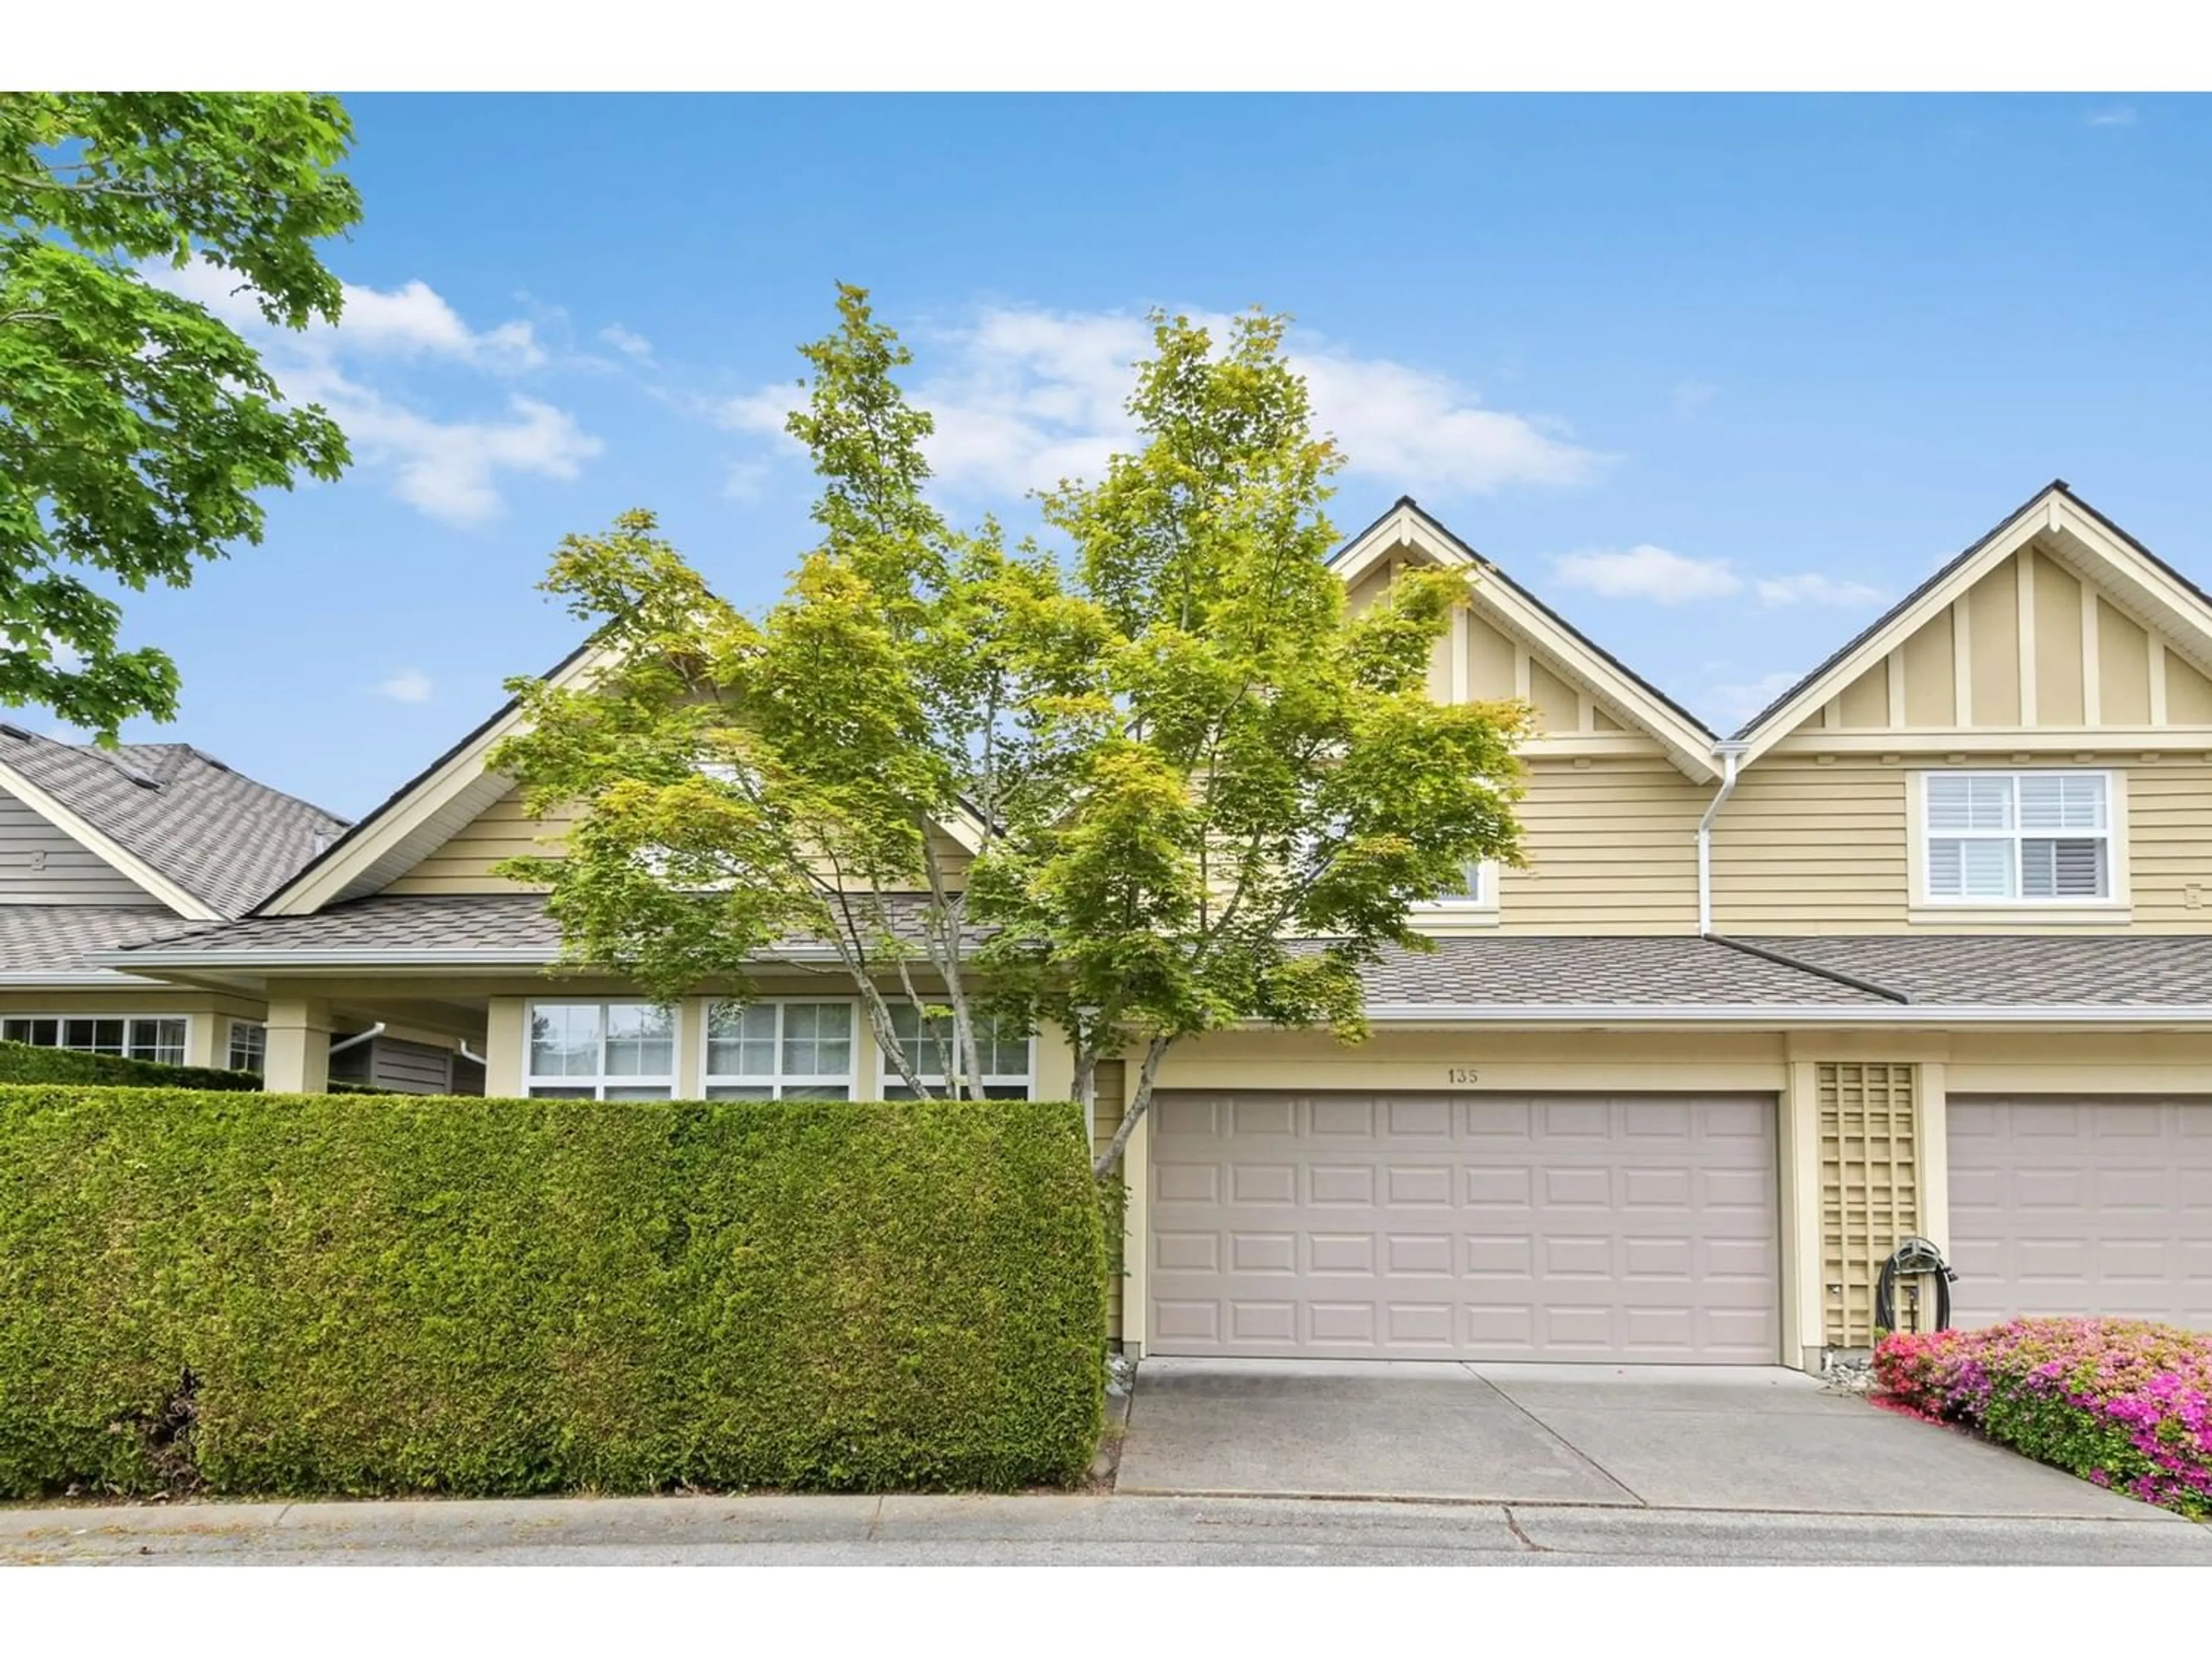 Frontside or backside of a home for 135 15500 ROSEMARY HEIGHTS CRESCENT, Surrey British Columbia V3S5B8